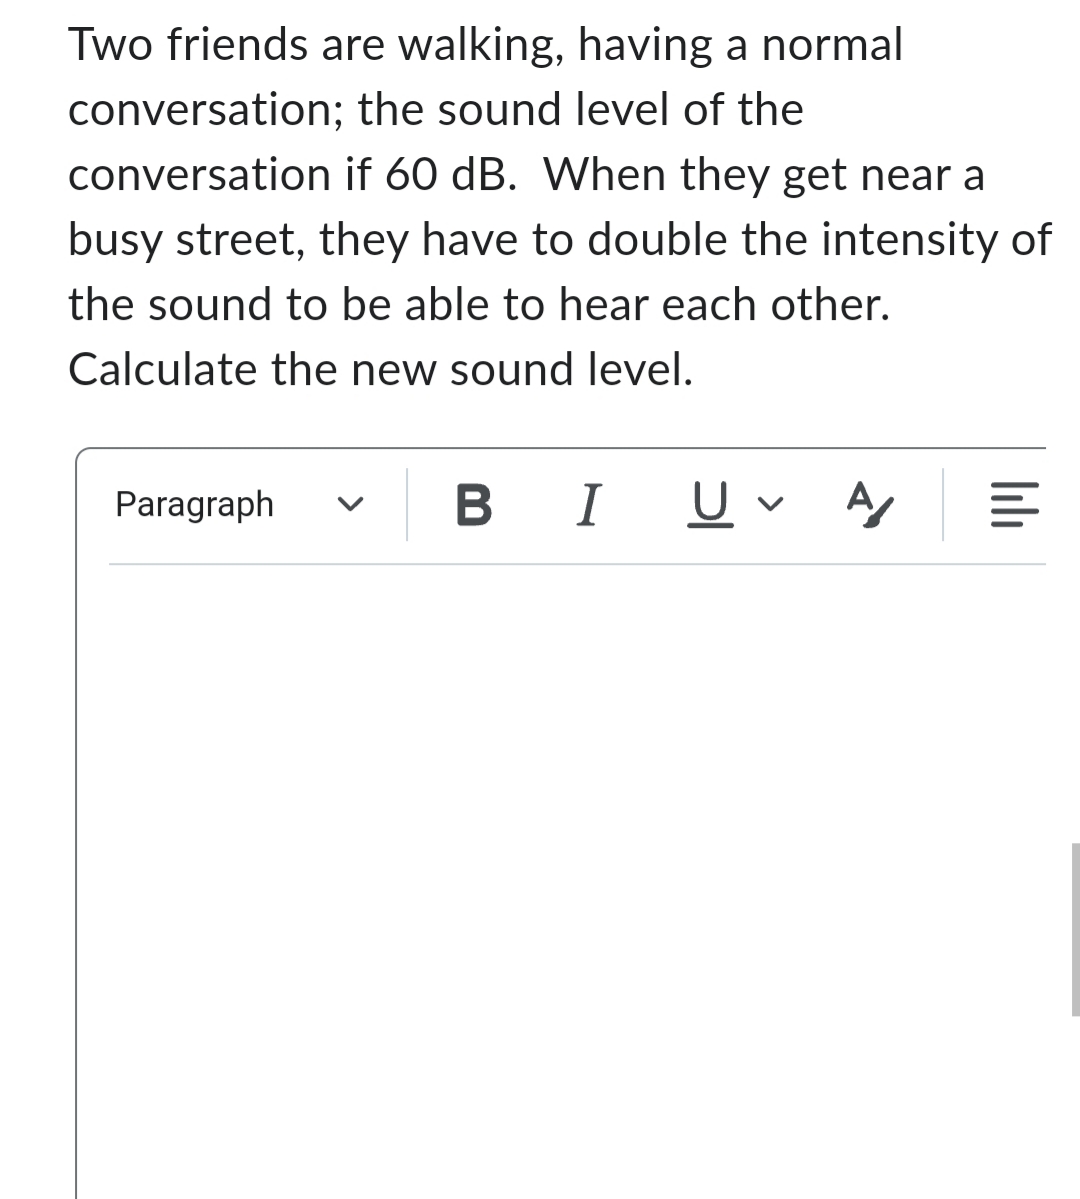 Two friends are walking, having a normal
the sound level of the
conversation;
conversation
if 60 dB. When they get near a
busy street, they have to double the intensity of
the sound to be able to hear each other.
Calculate the new sound level.
Paragraph
BI Uv A/
|||||